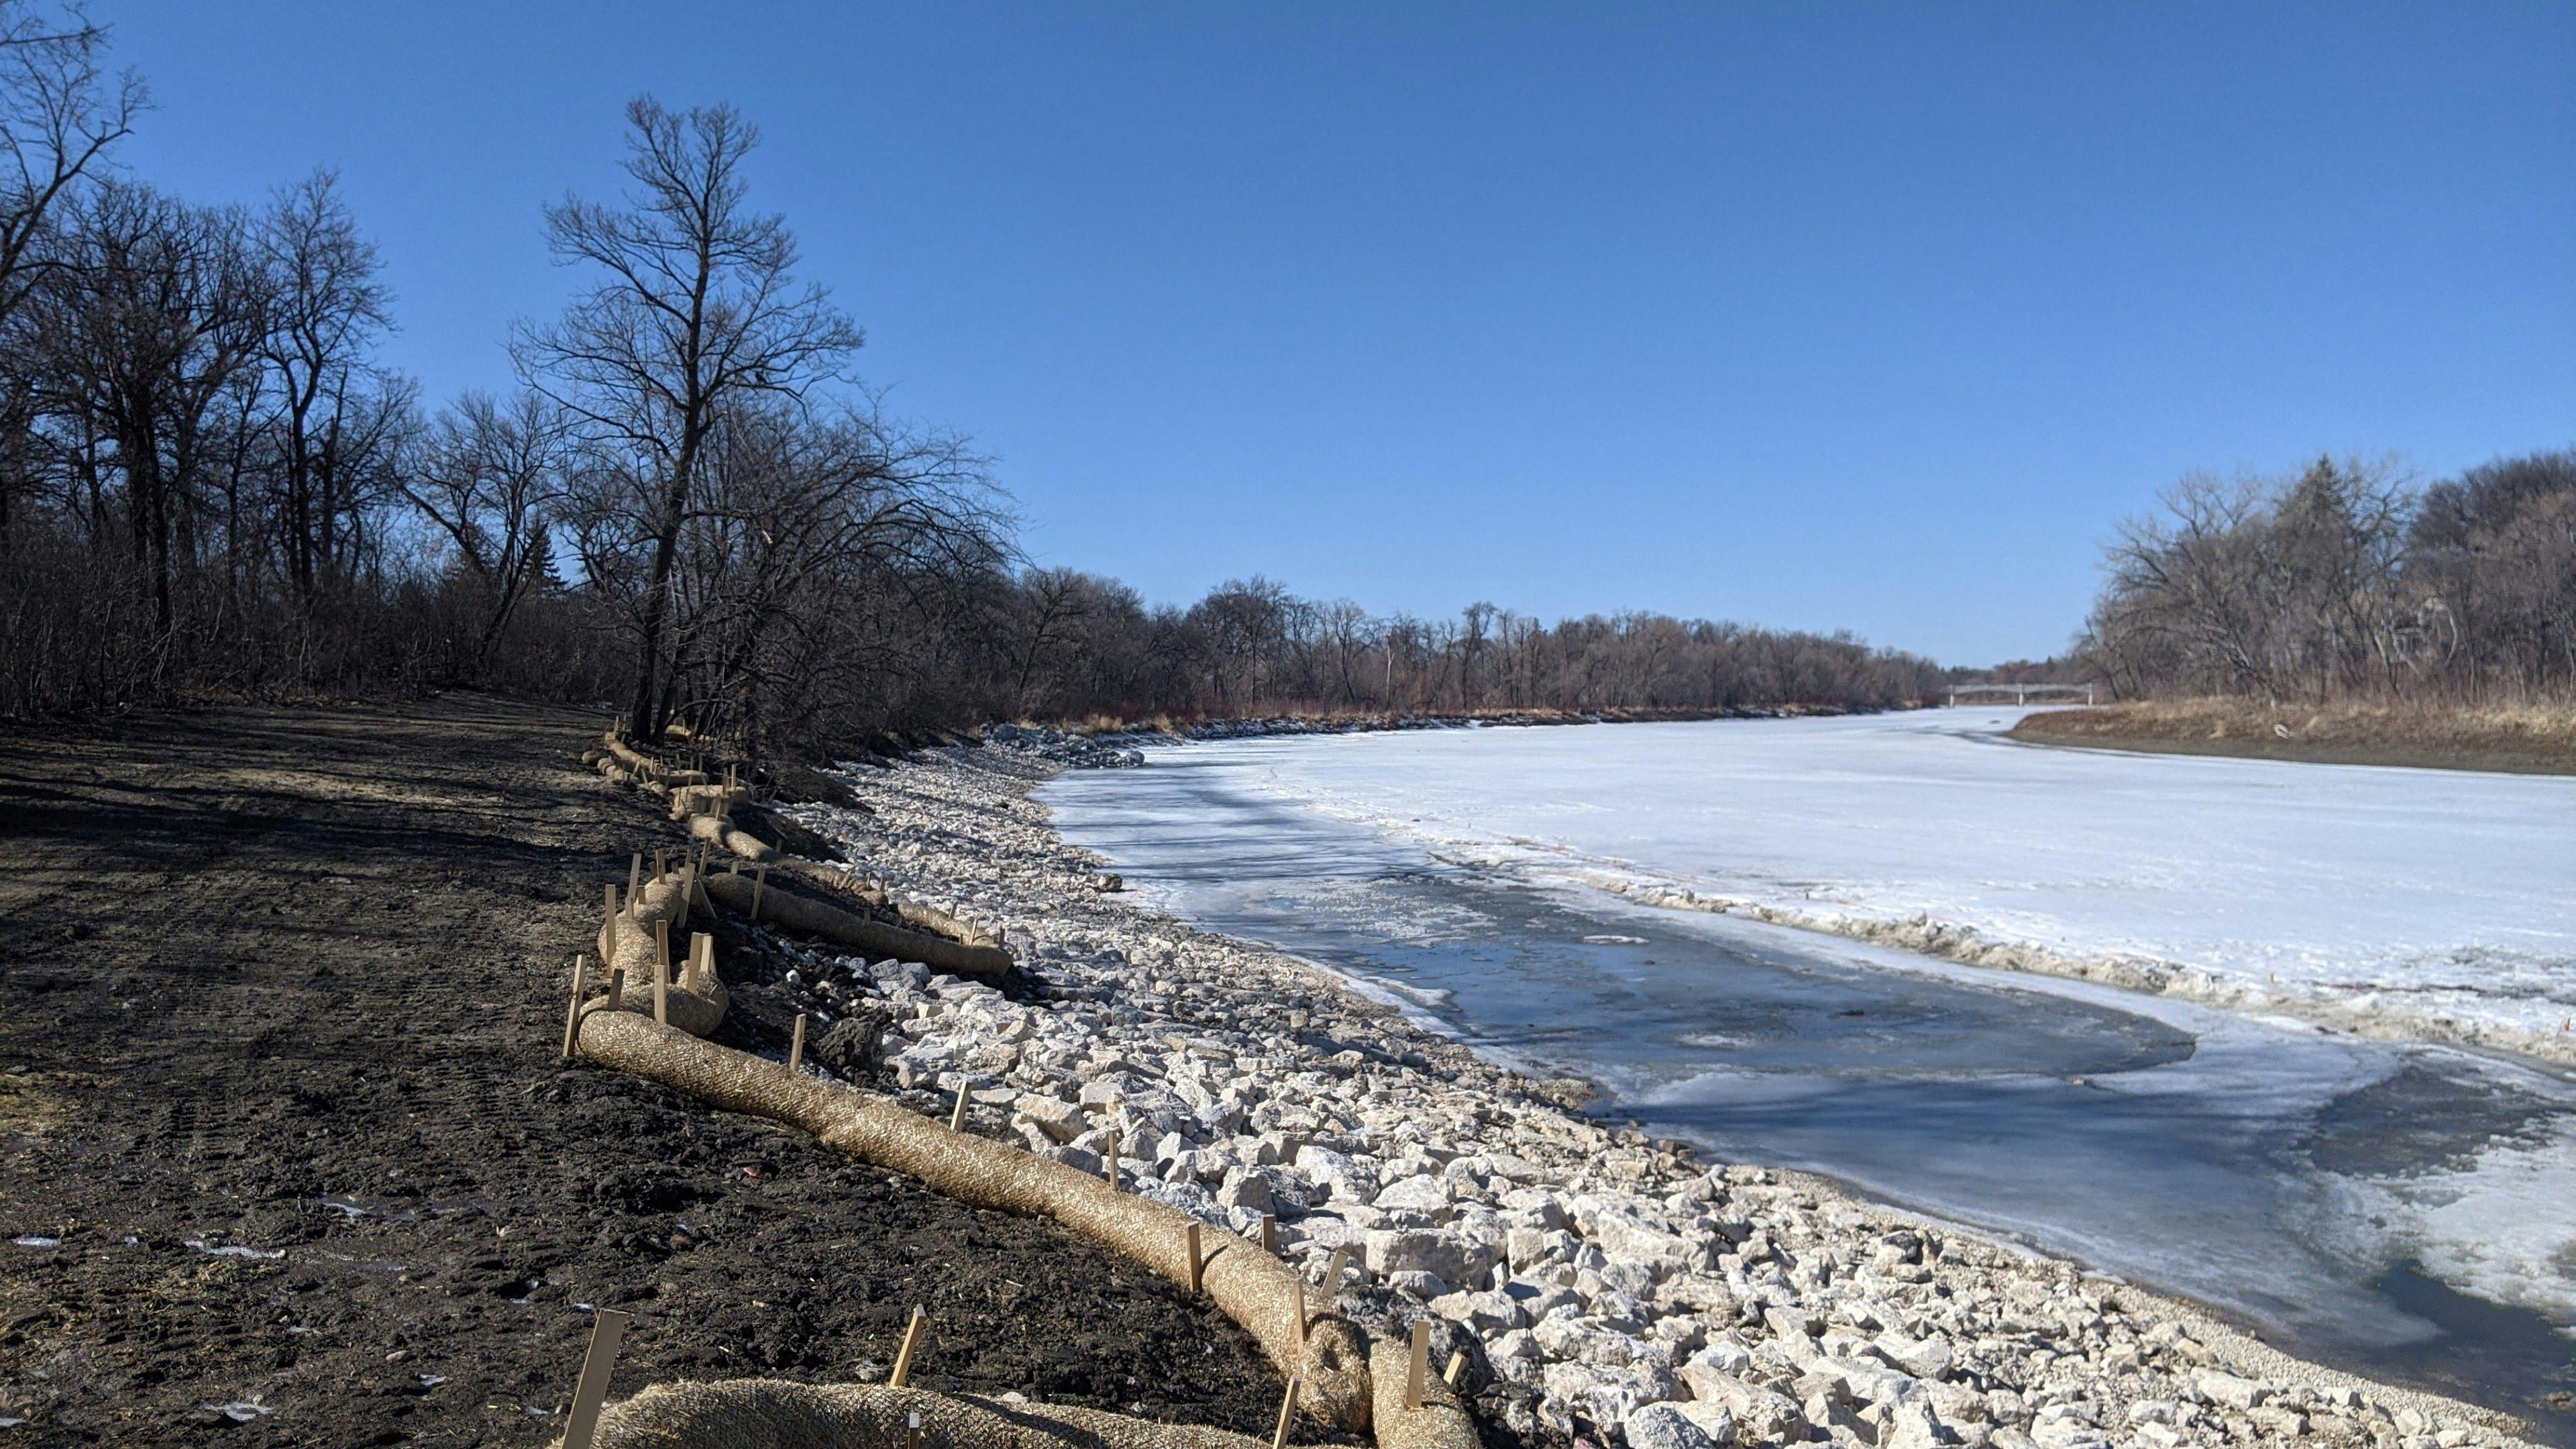 Riverbank stabilization and erosion protection after Phase 1 construction - March 2021